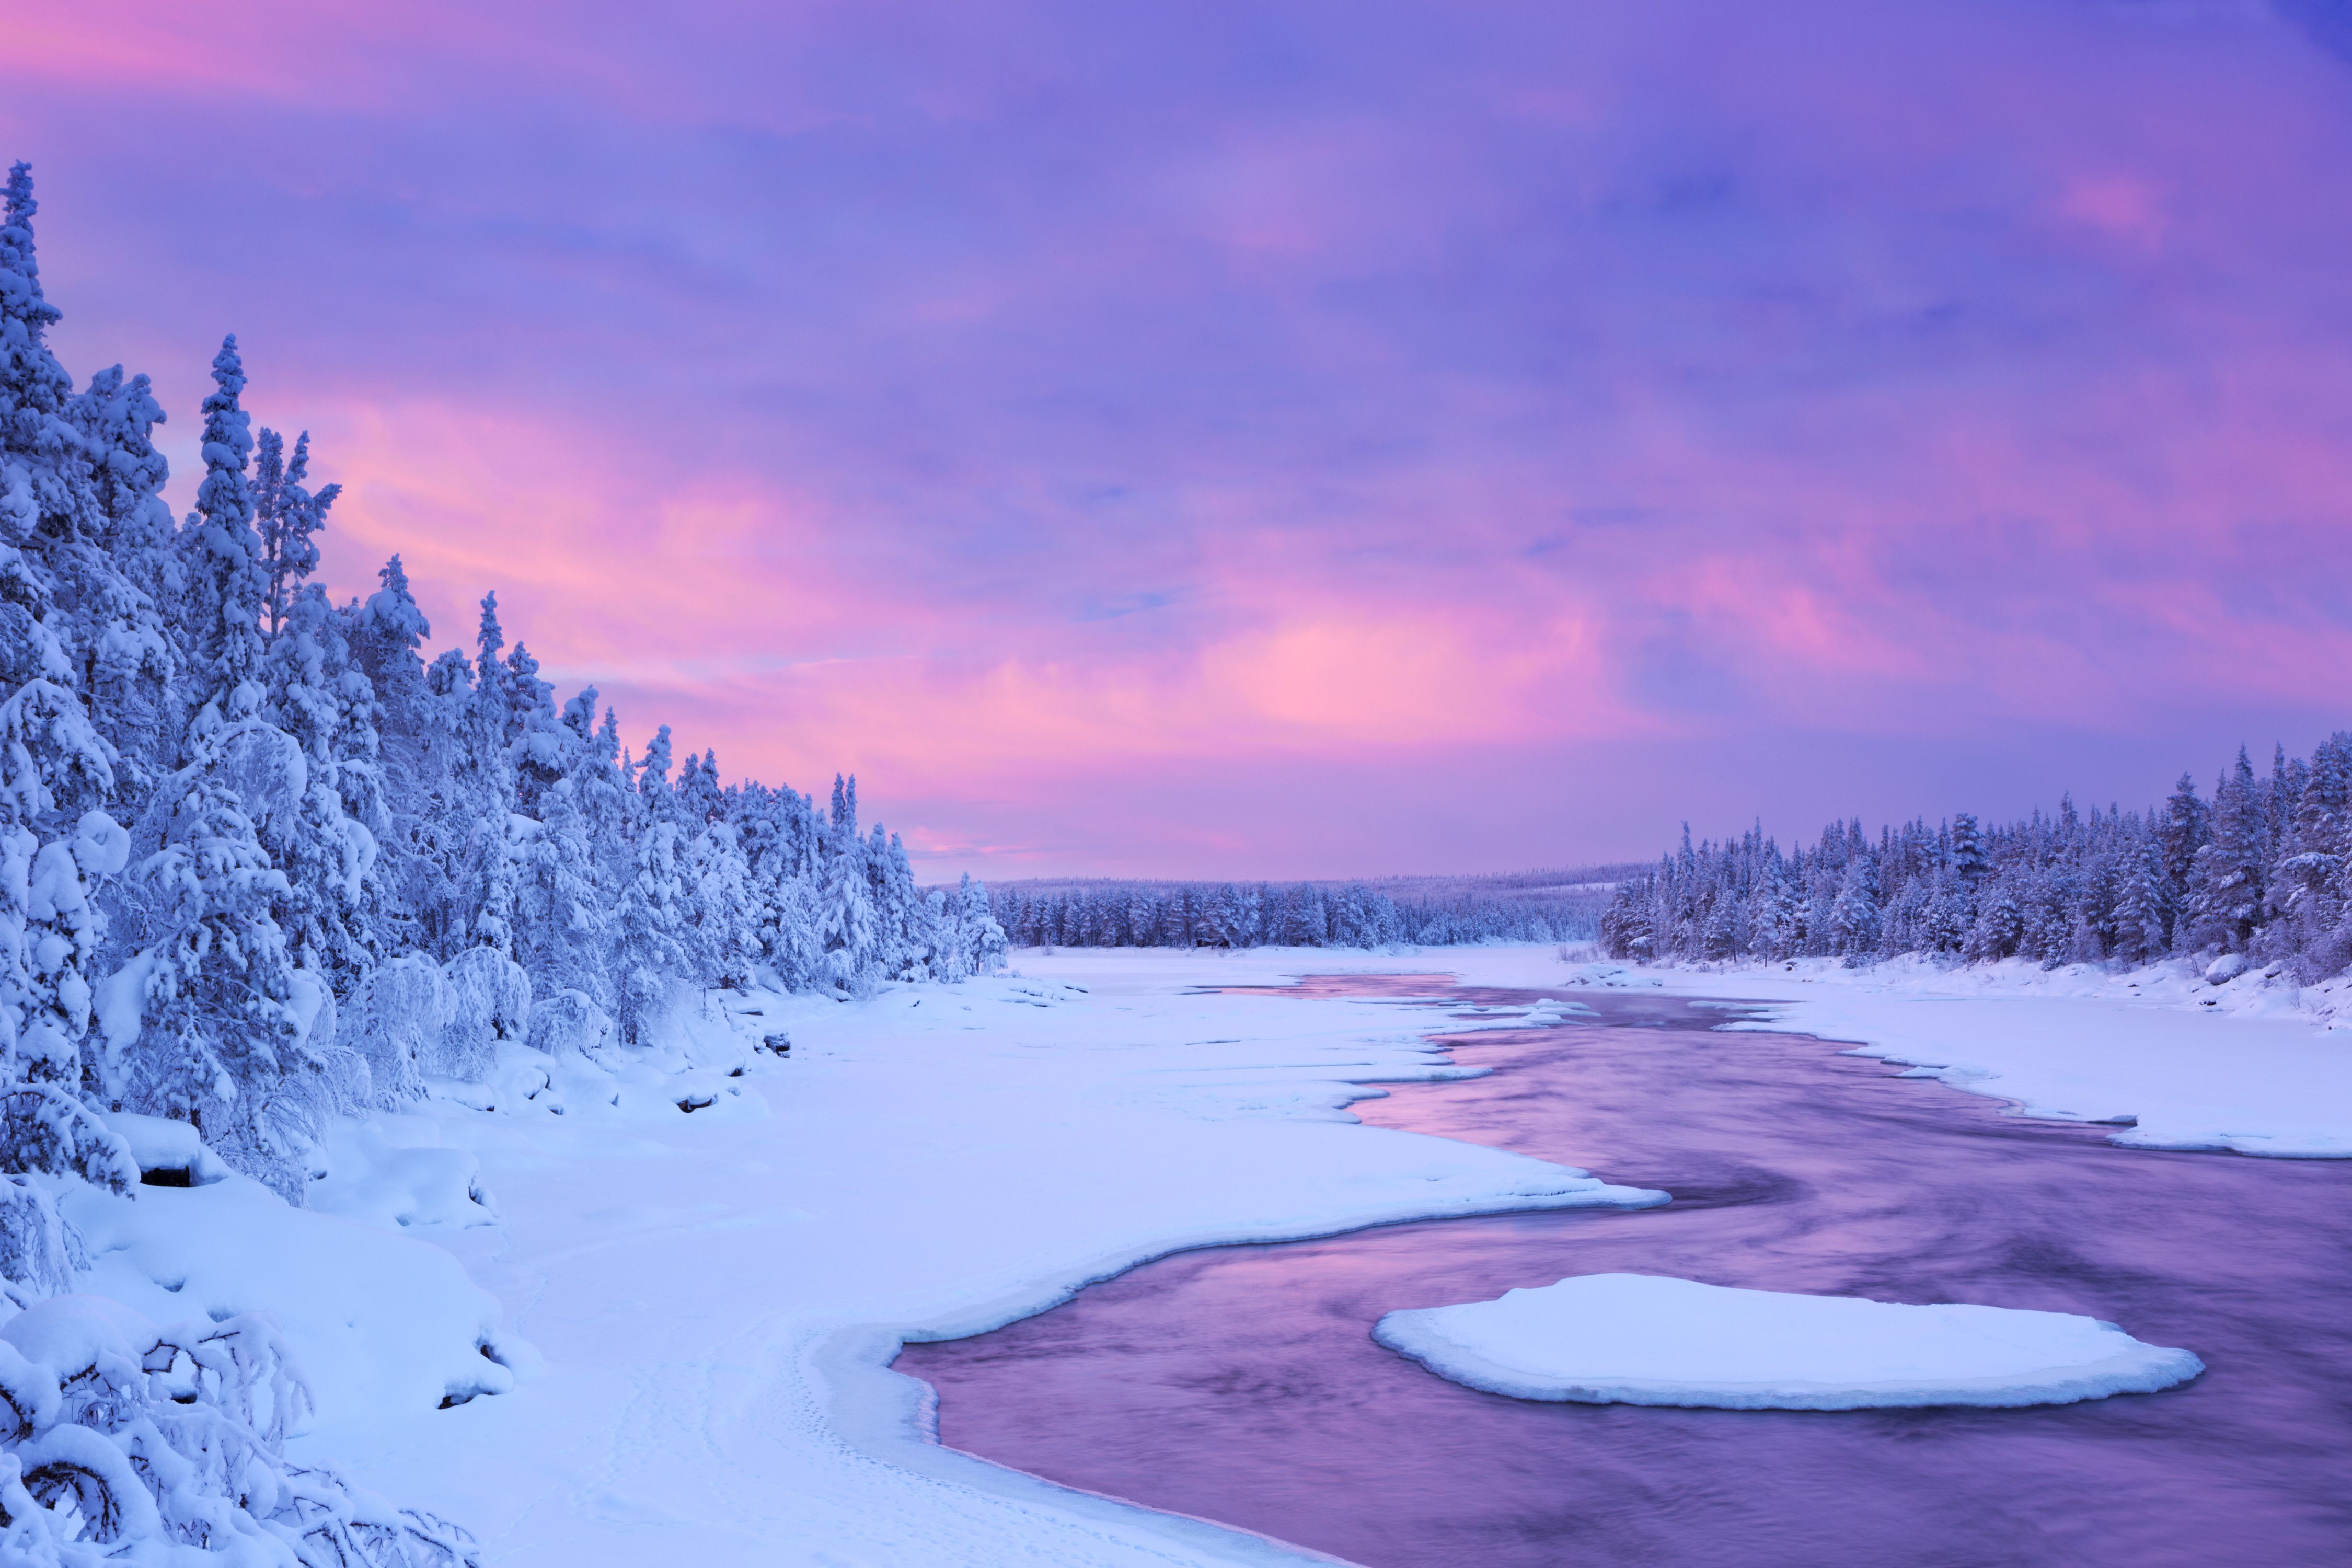 Wallpaper. Beautiful picture. photo. picture. Lapland, Finland, winter, the sky, snow